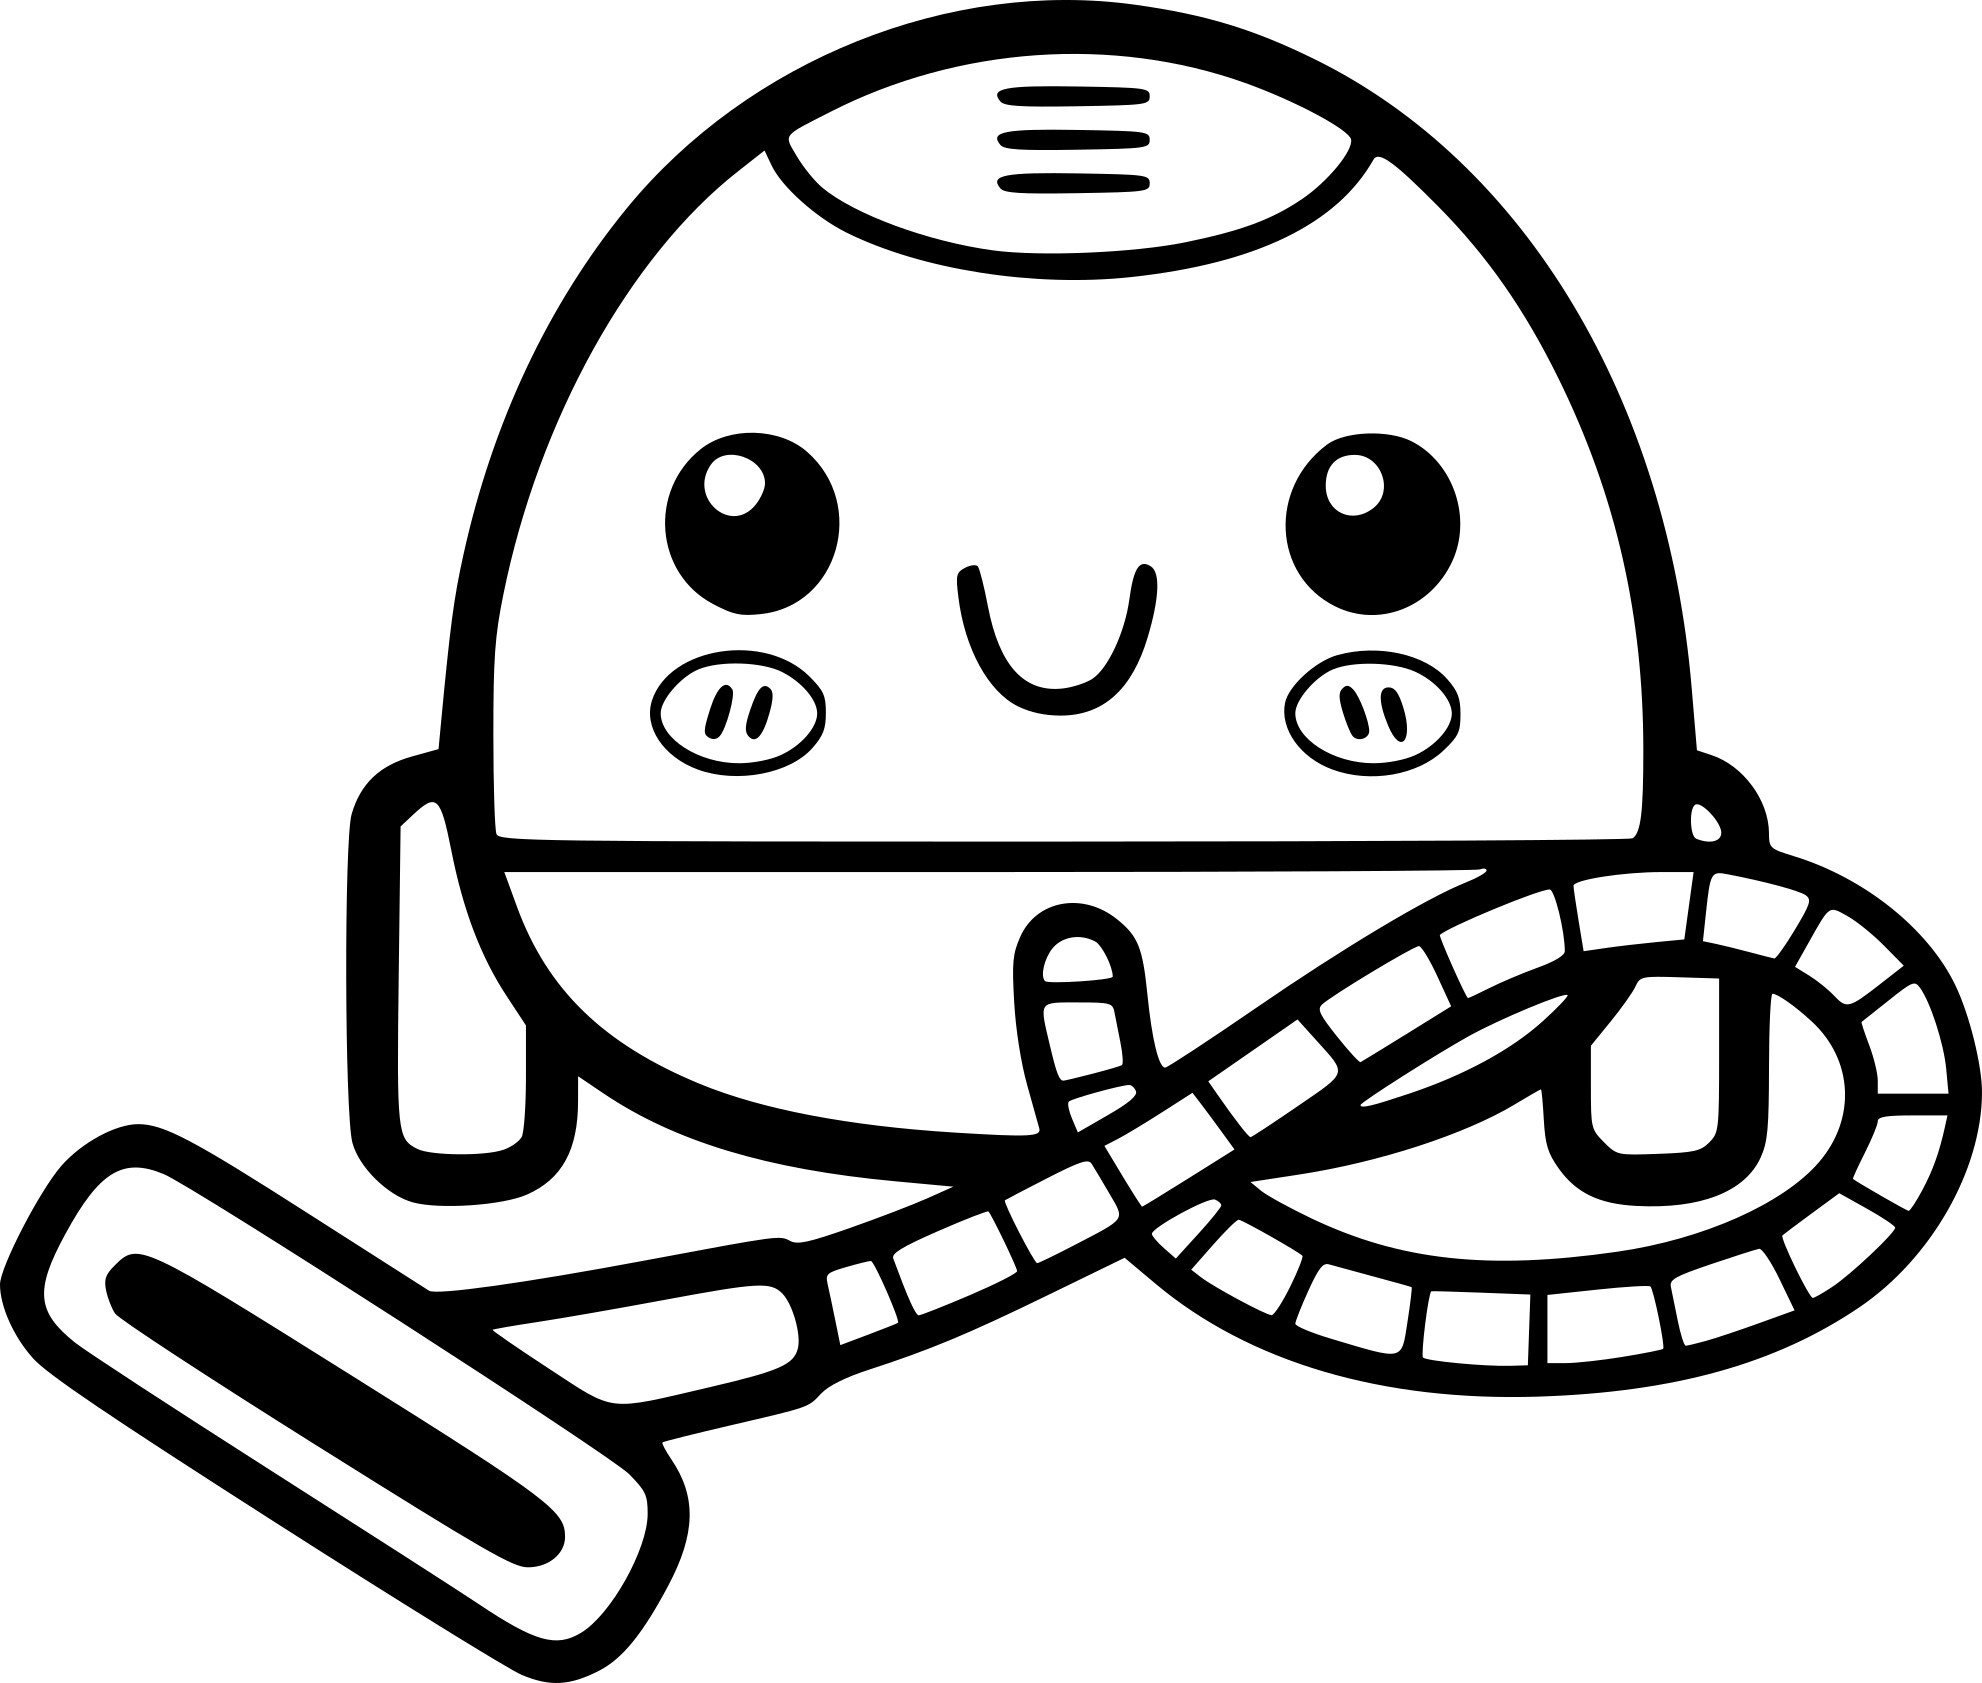 Vacuum Cleaner coloring page